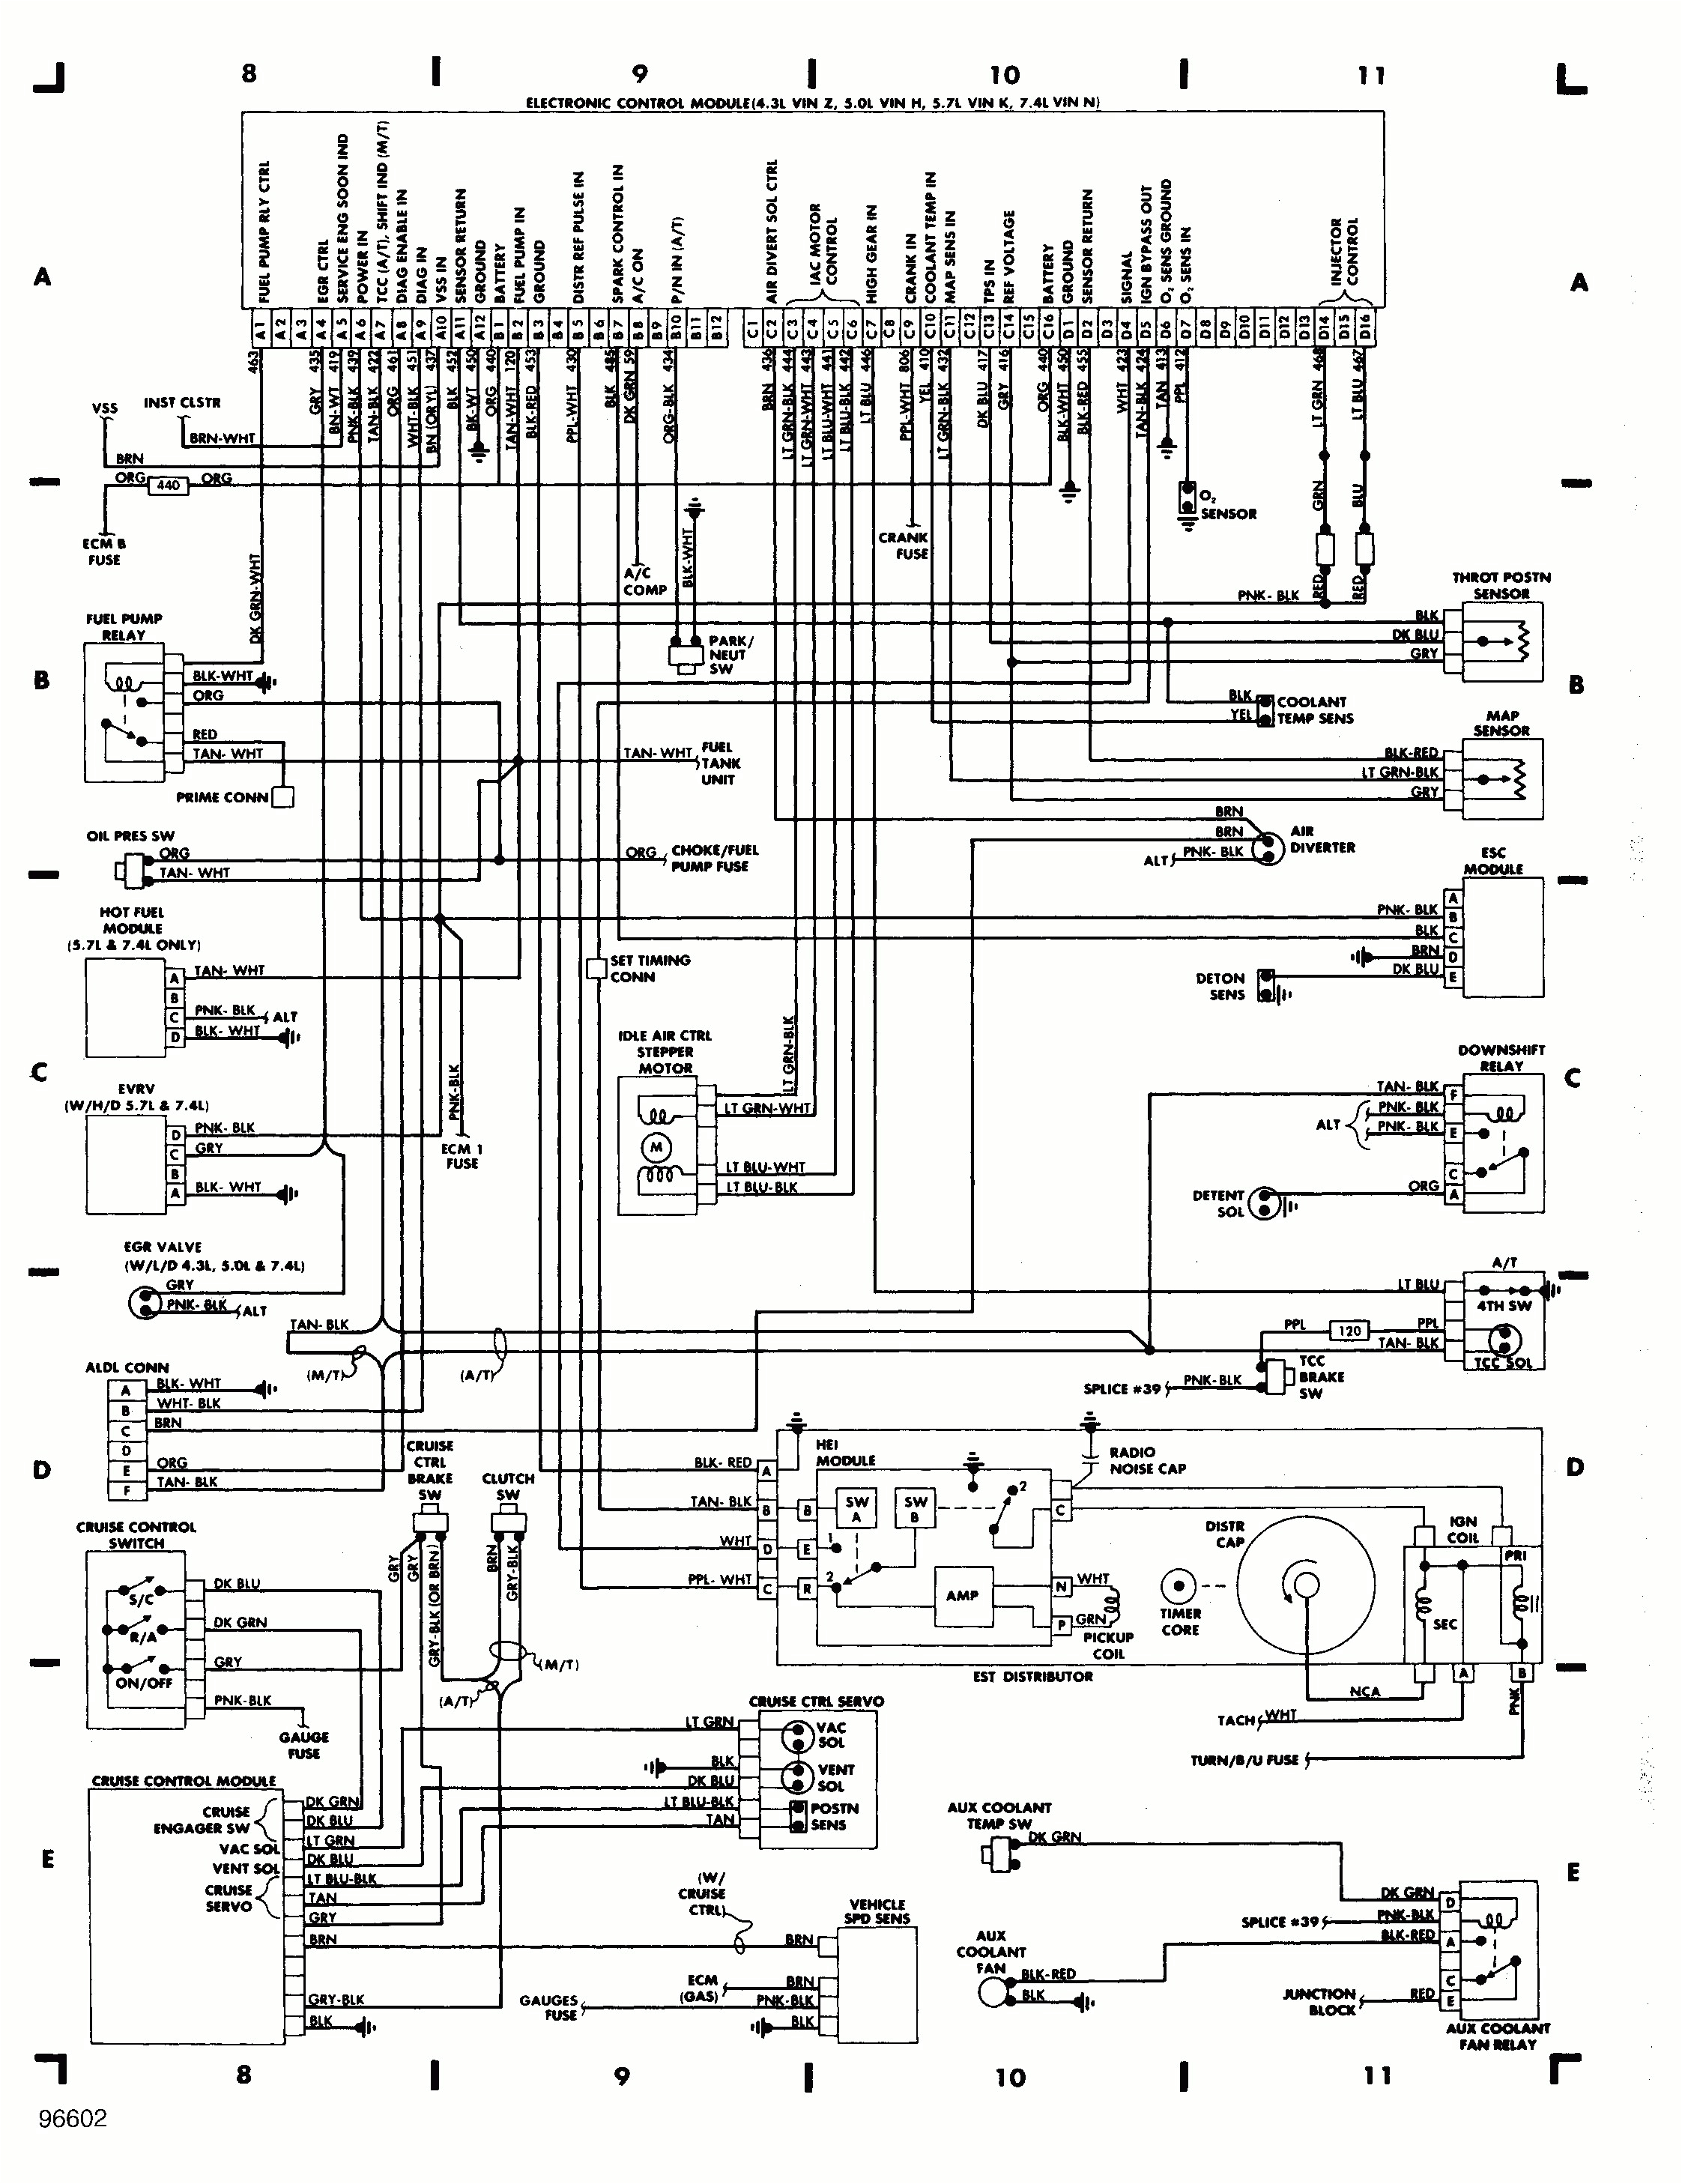 tbi harness diagram use wiring diagram chevy 4 3 tbi wiring diagram chevy 4 3 tbi wiring diagram